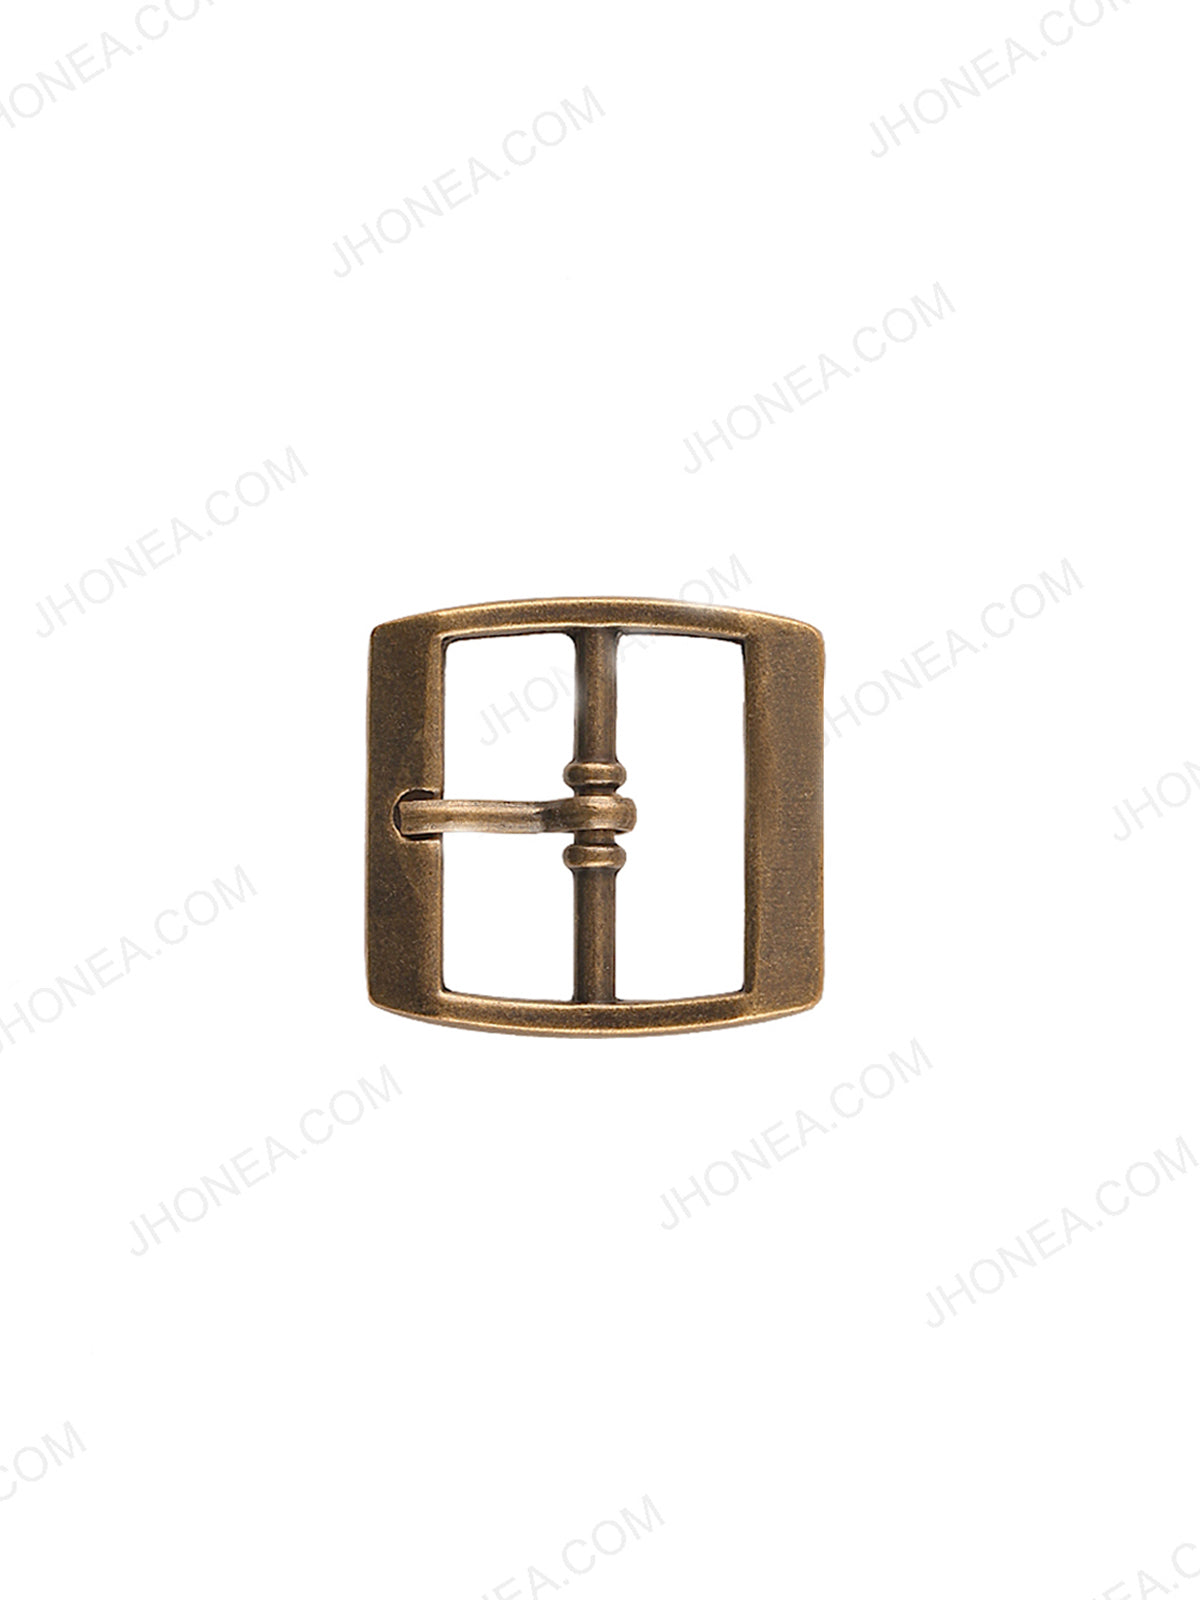 2pcs 1 Inch Square Belt Buckle Single Prong Strap Buckles 